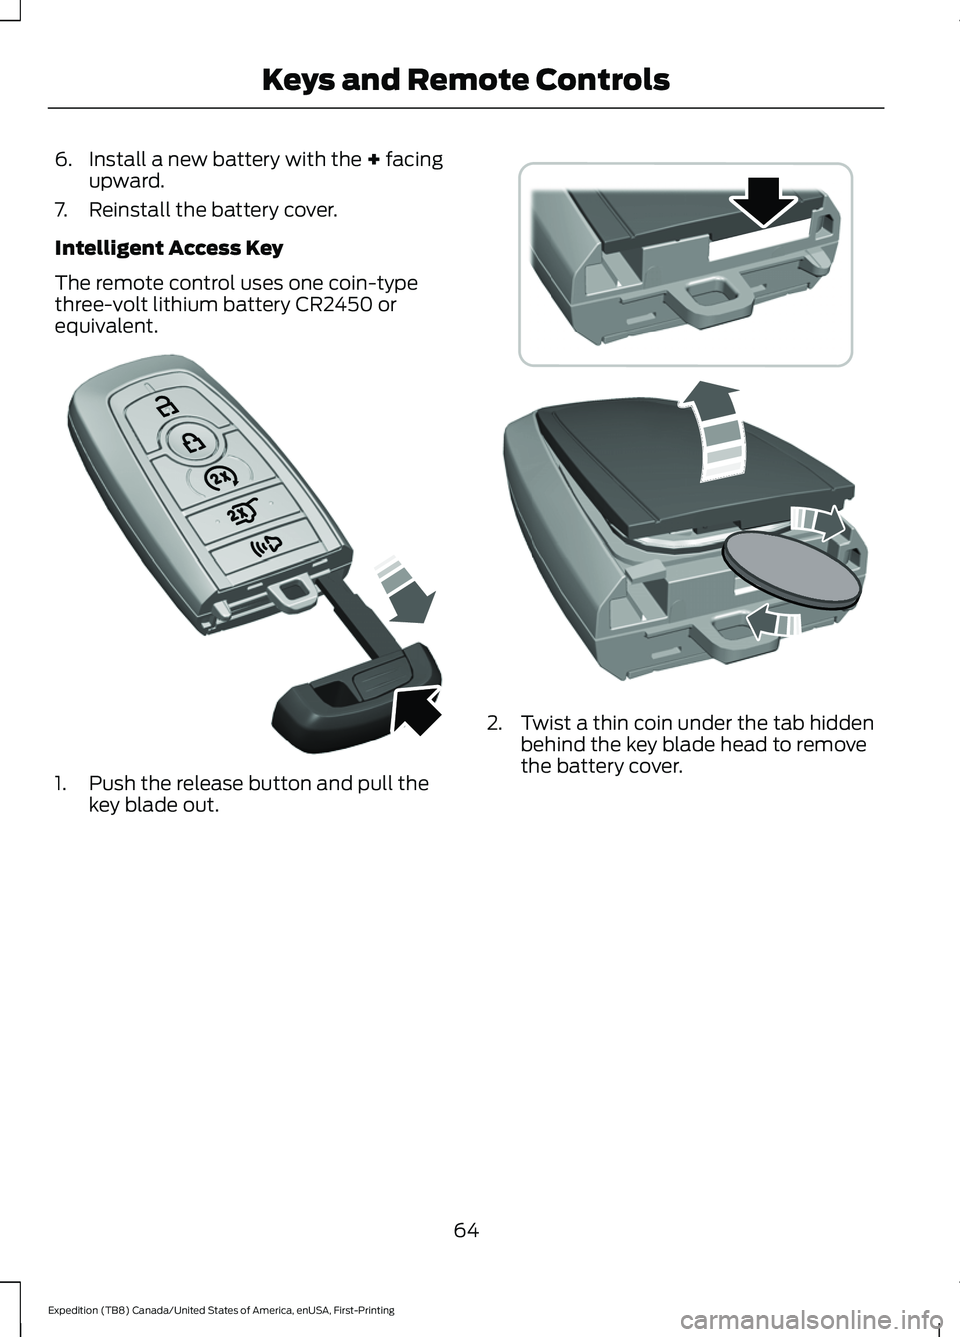 FORD EXPEDITION 2021  Owners Manual 6. Install a new battery with the + facing
upward.
7. Reinstall the battery cover.
Intelligent Access Key
The remote control uses one coin-type
three-volt lithium battery CR2450 or
equivalent. 1. Push